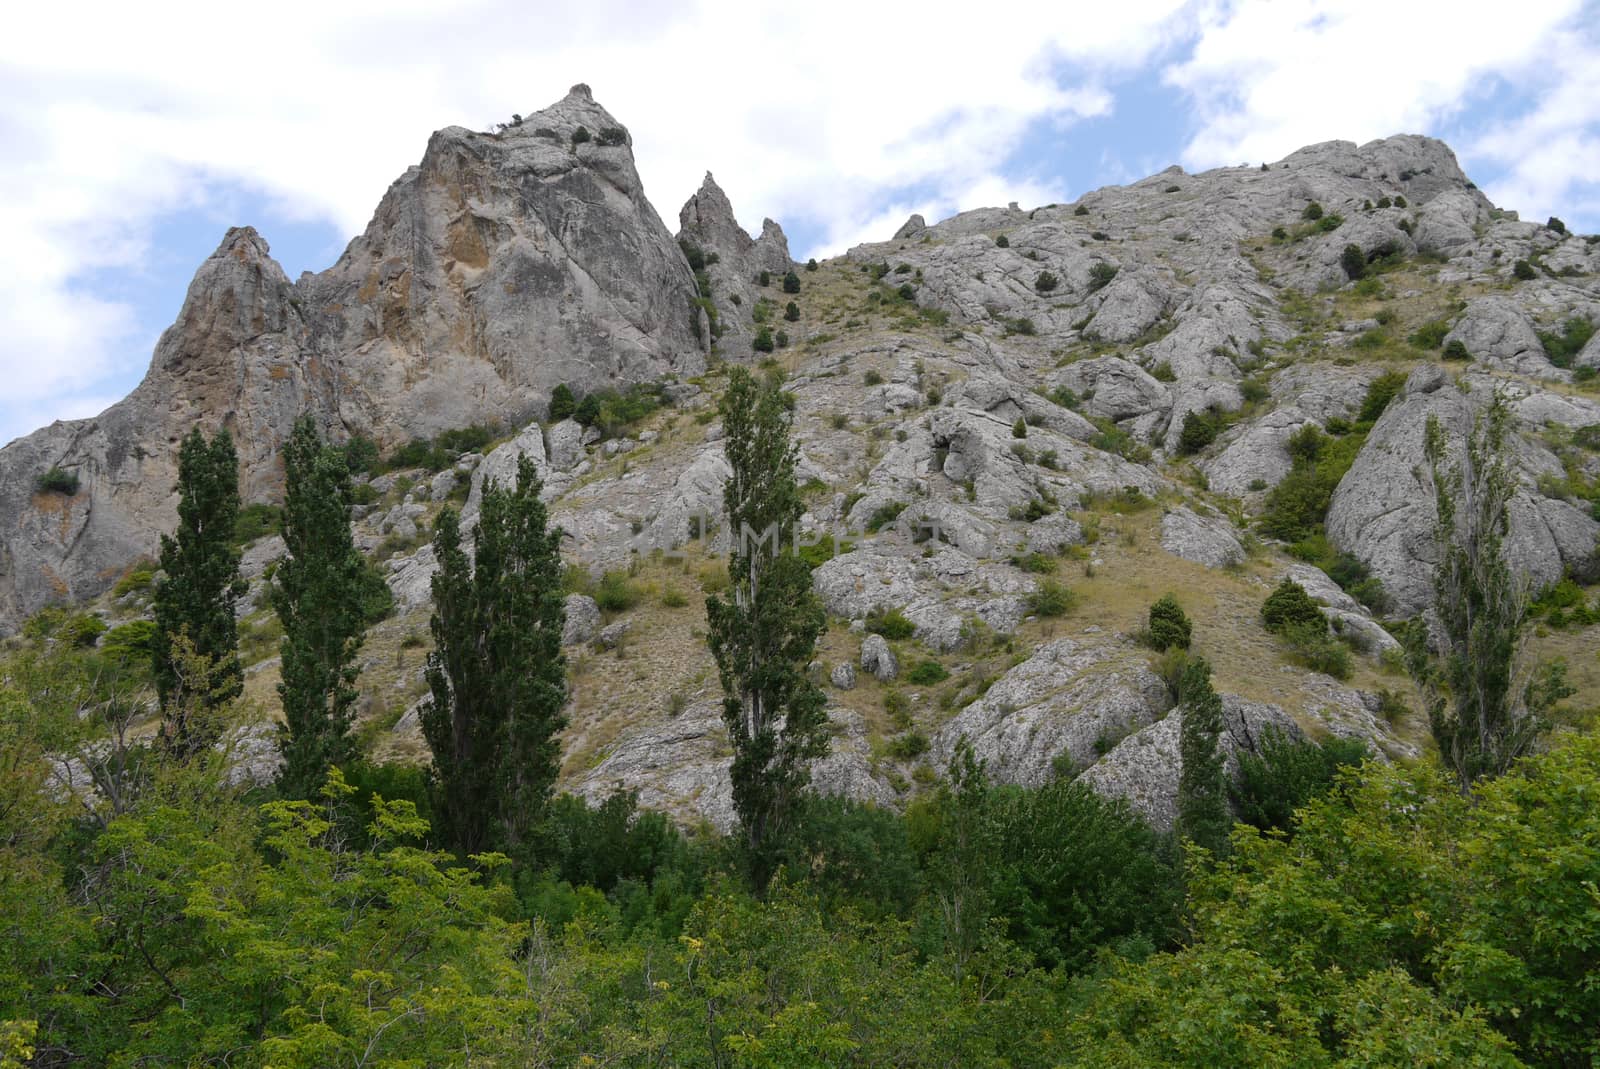 stony mountain with forest and cypress trees in the foreground by Adamchuk